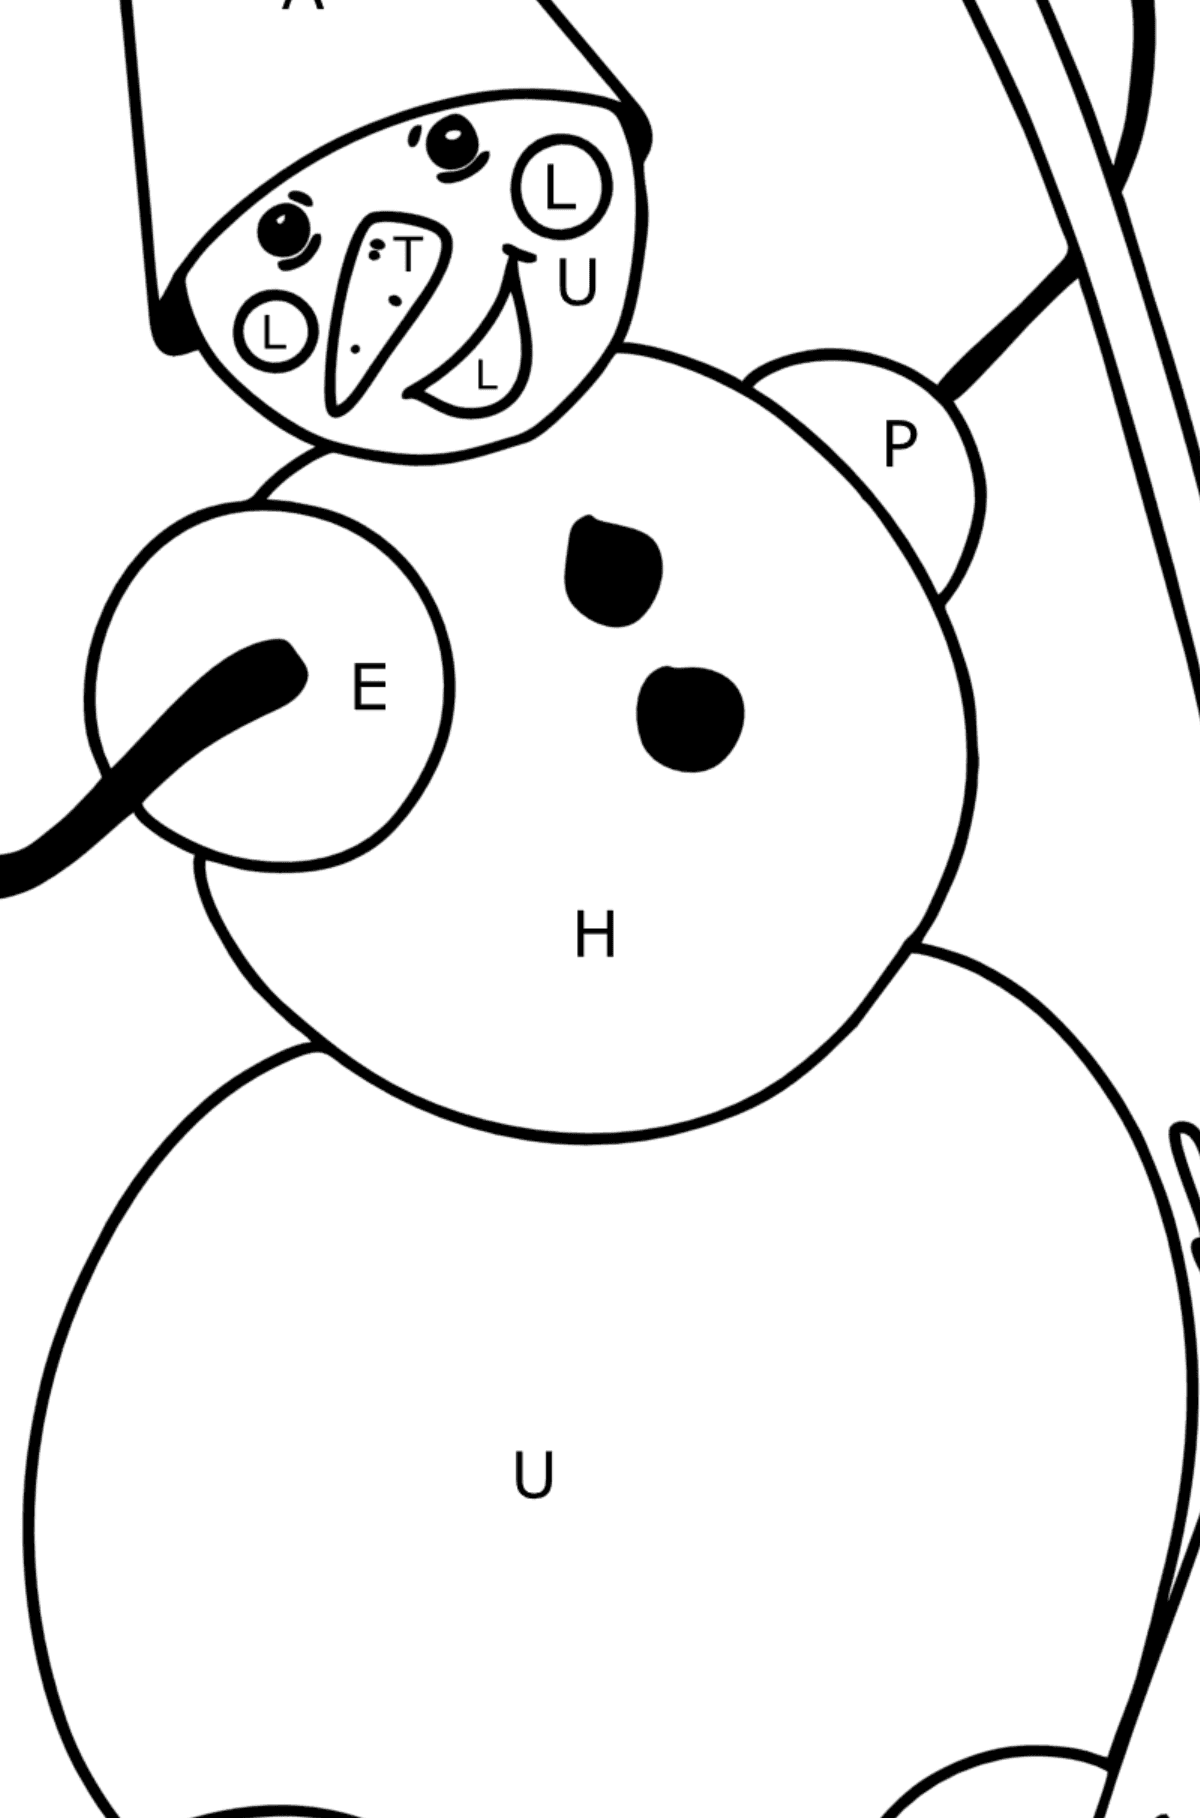 Snowman with Broom coloring page - Coloring by Letters for Kids